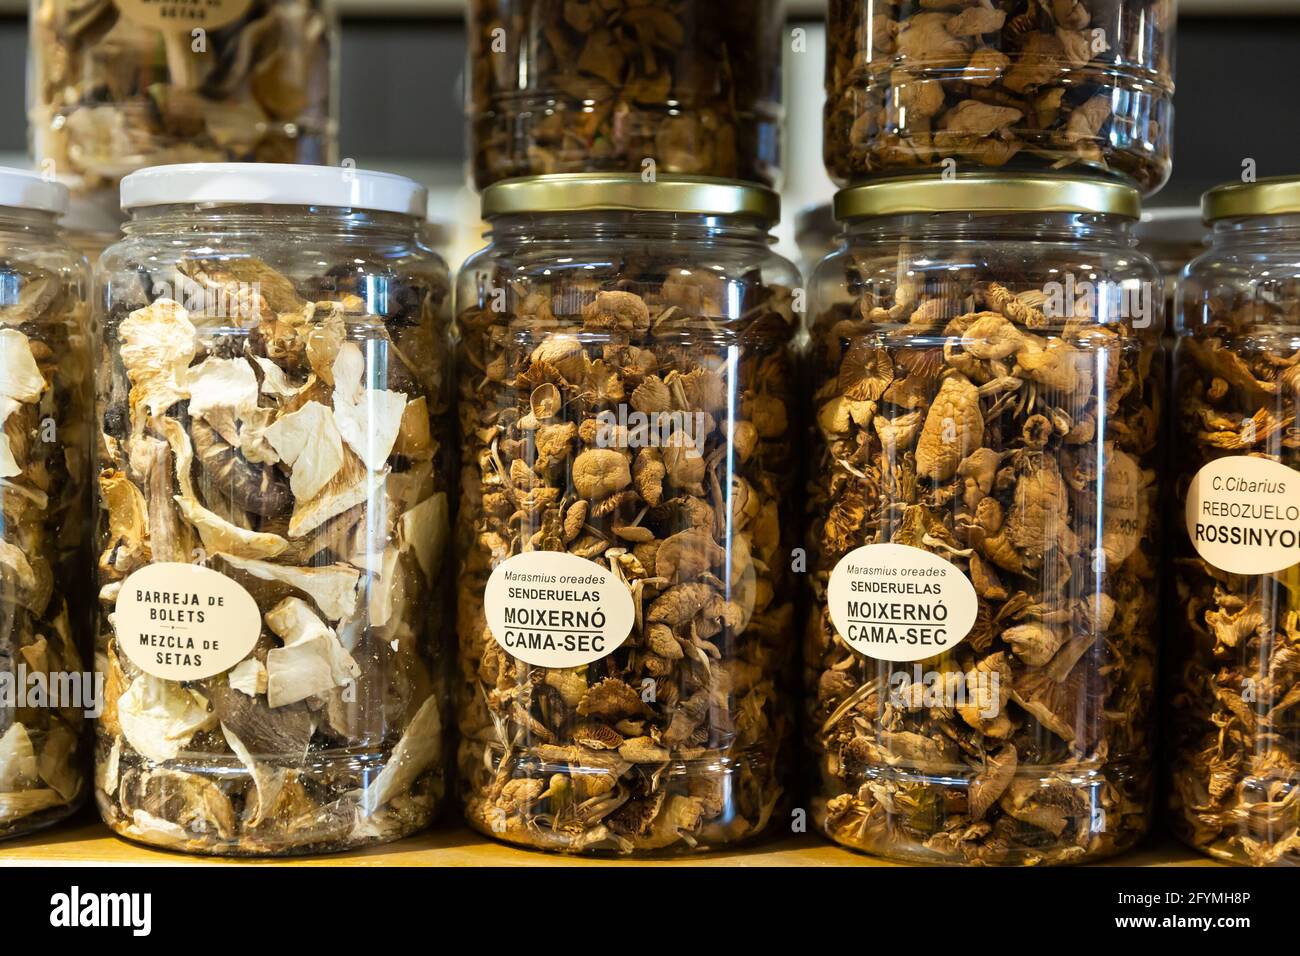 Assortment of dried mushrooms in jars at grocery store showcase Stock Photo